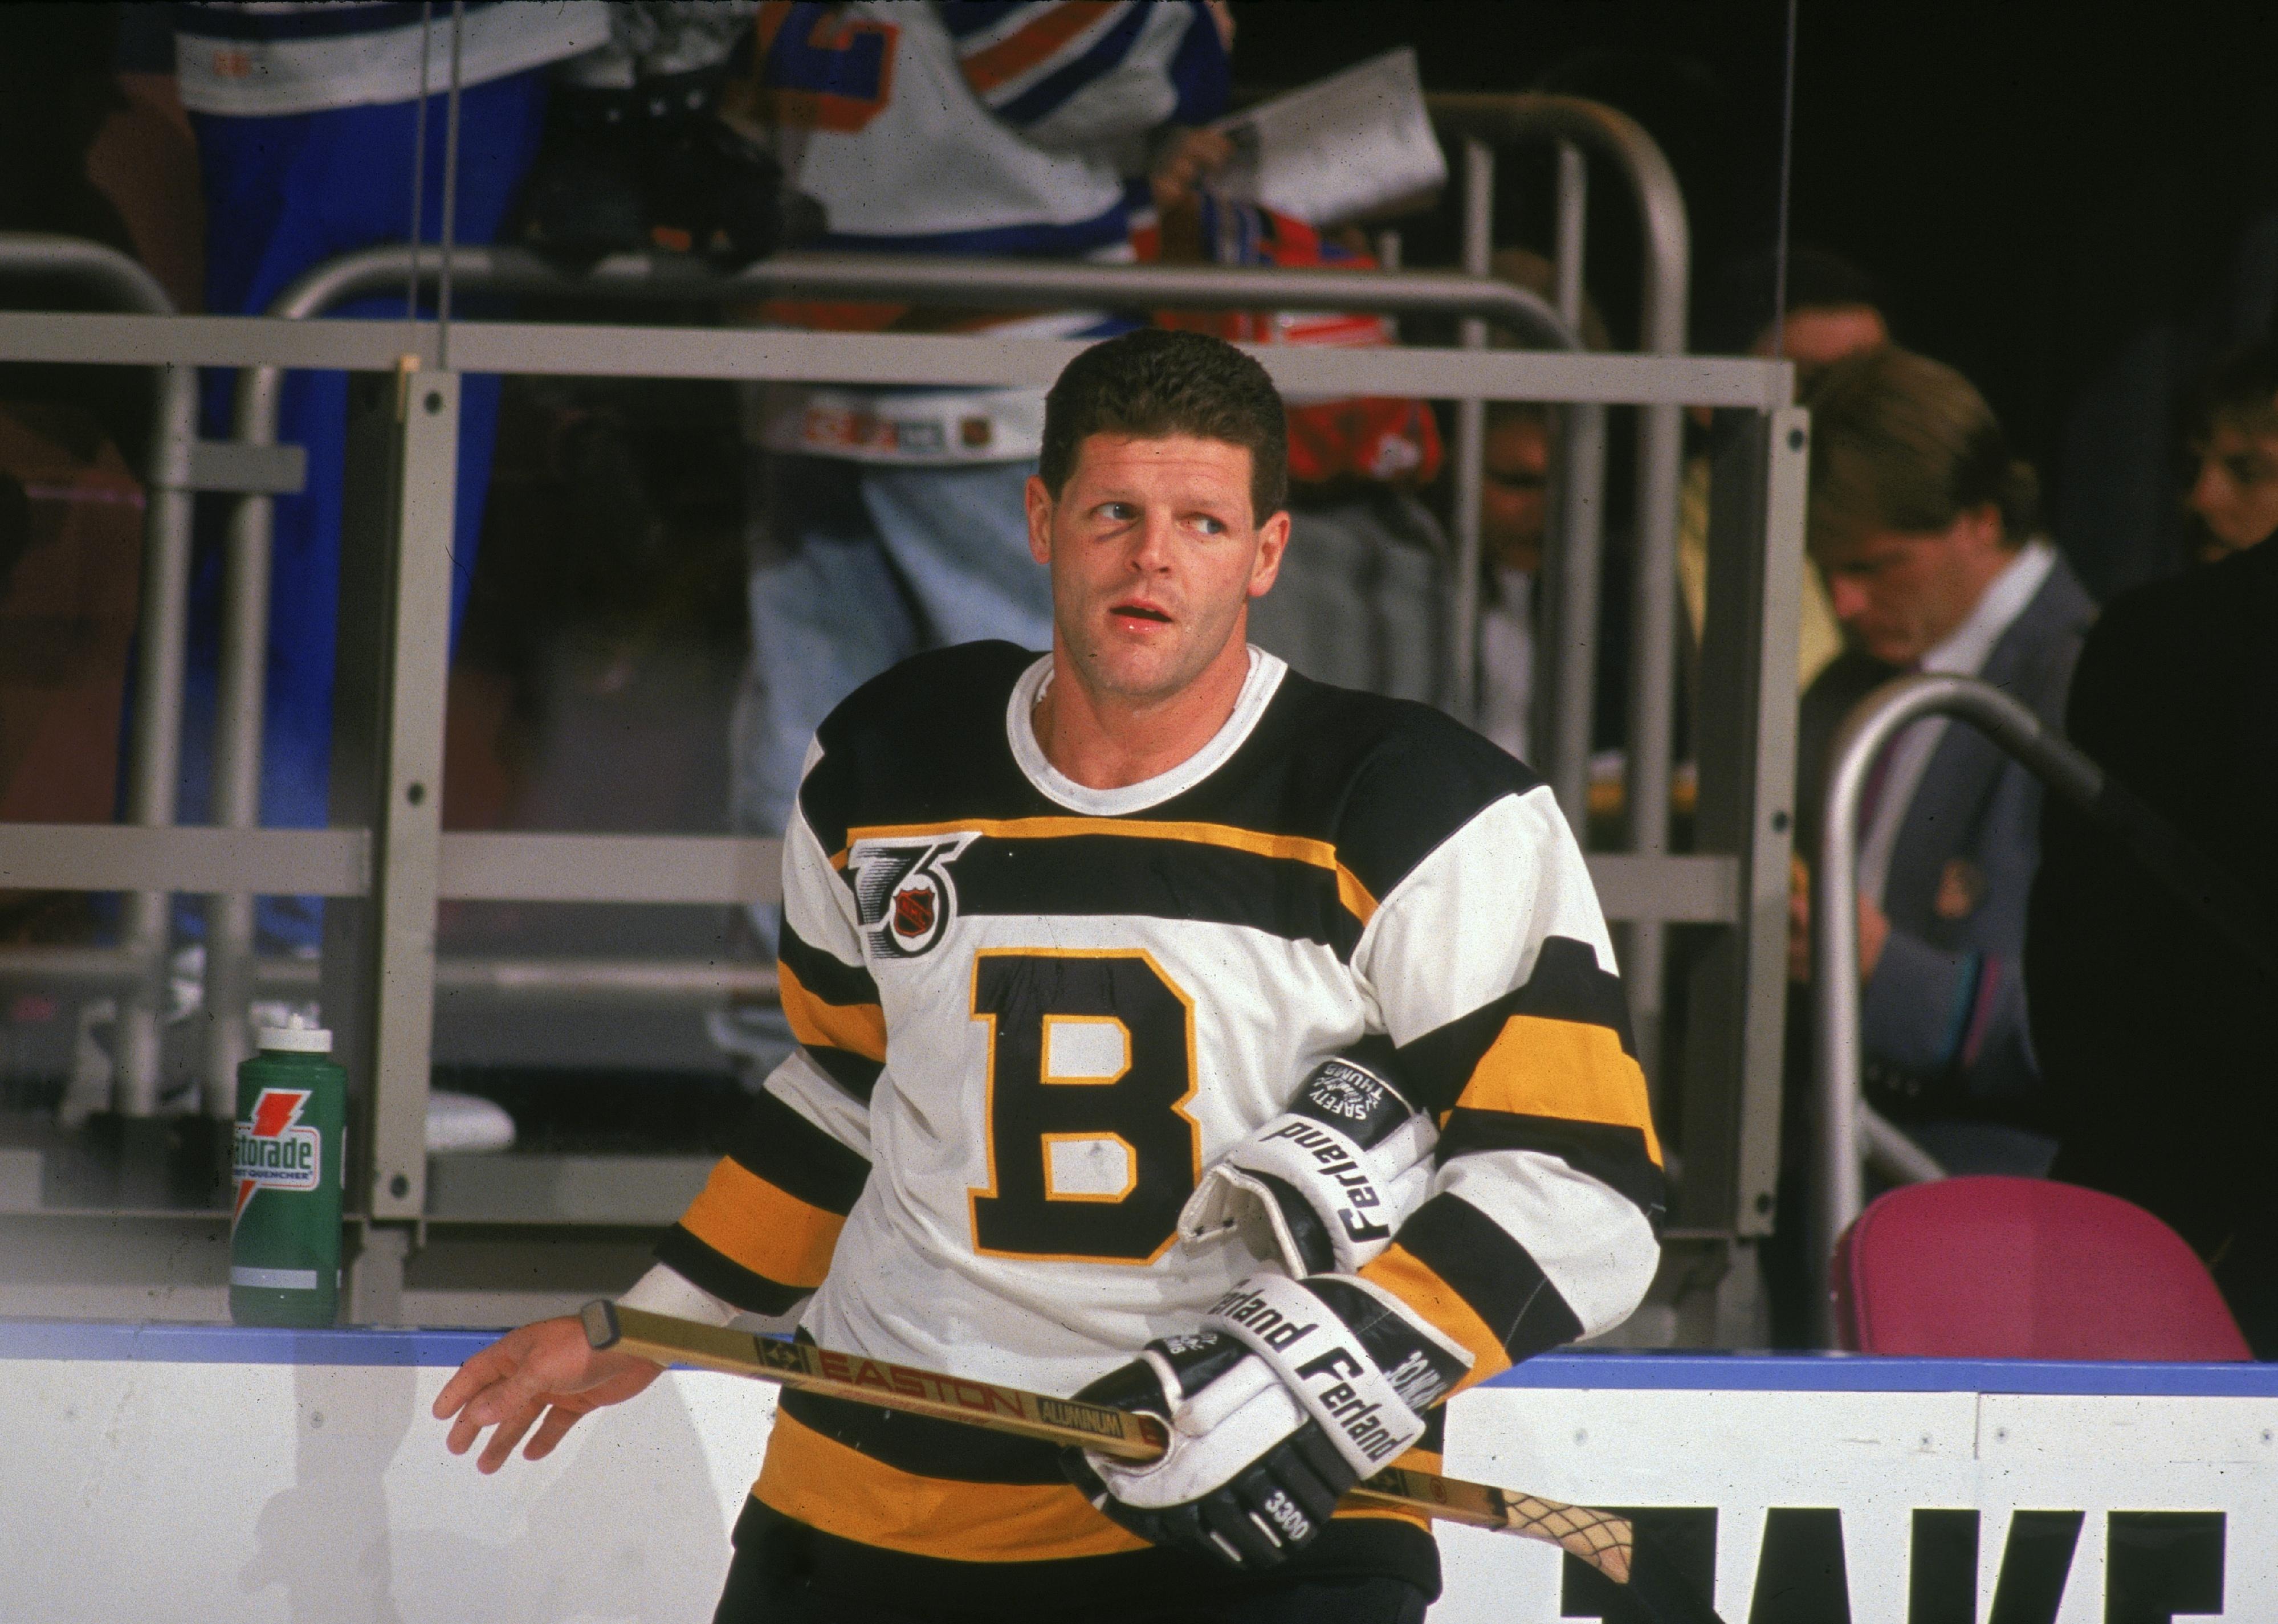 Chris Nilan with a wound under his eye during a game.